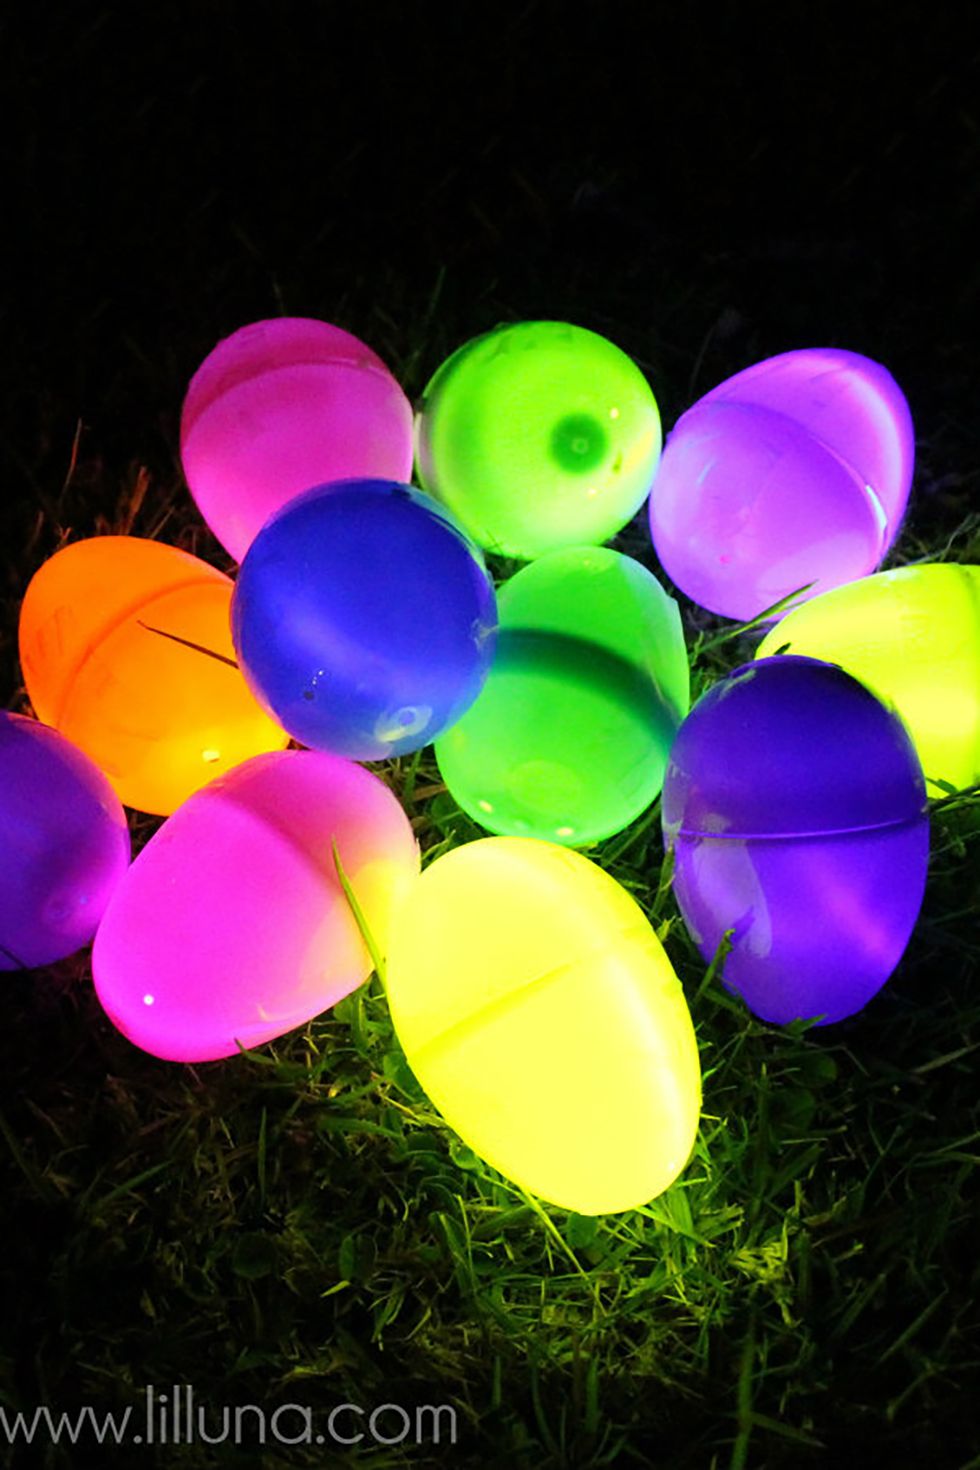 pink, yellow, green, orange, and purple easter eggs glowing in the grass at night for adult easter egg hunt